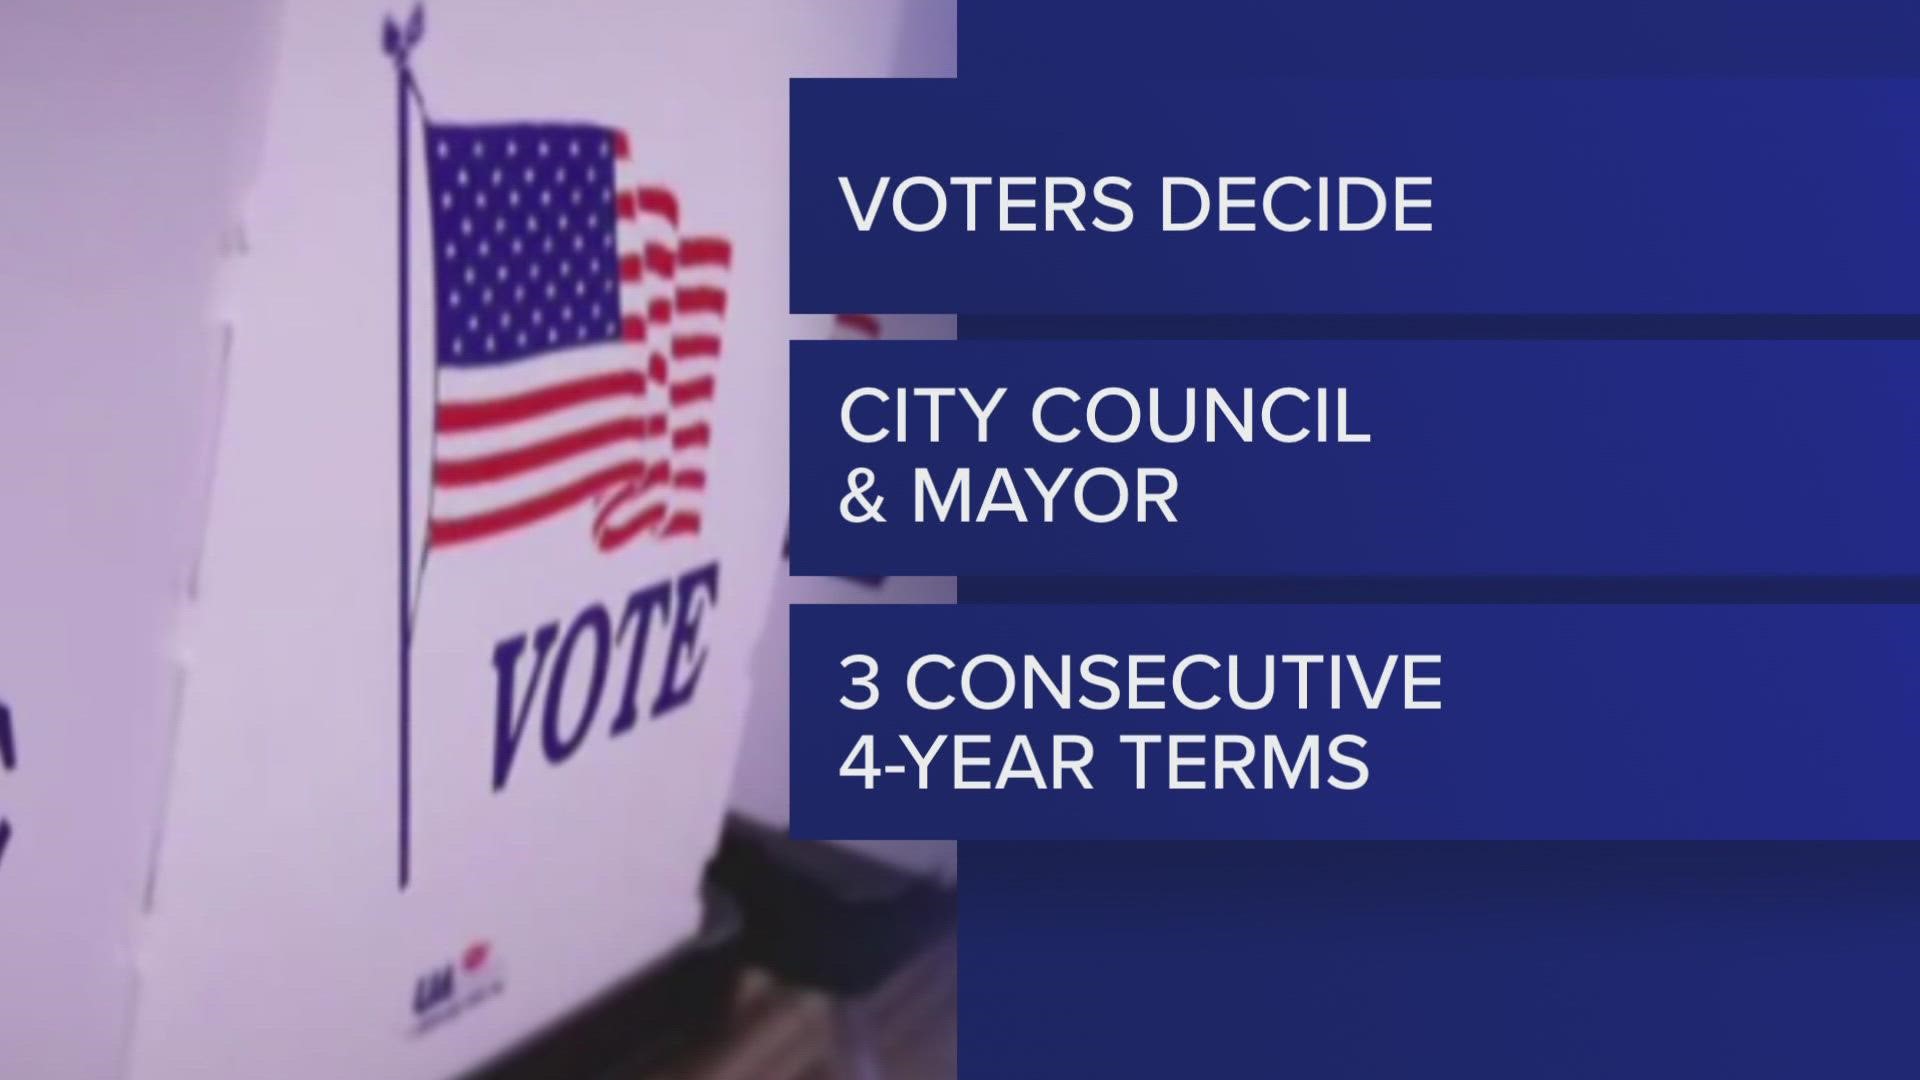 Tuesday, the city council agreed to let voters decide if the mayor and council members can serve three 4-year terms.